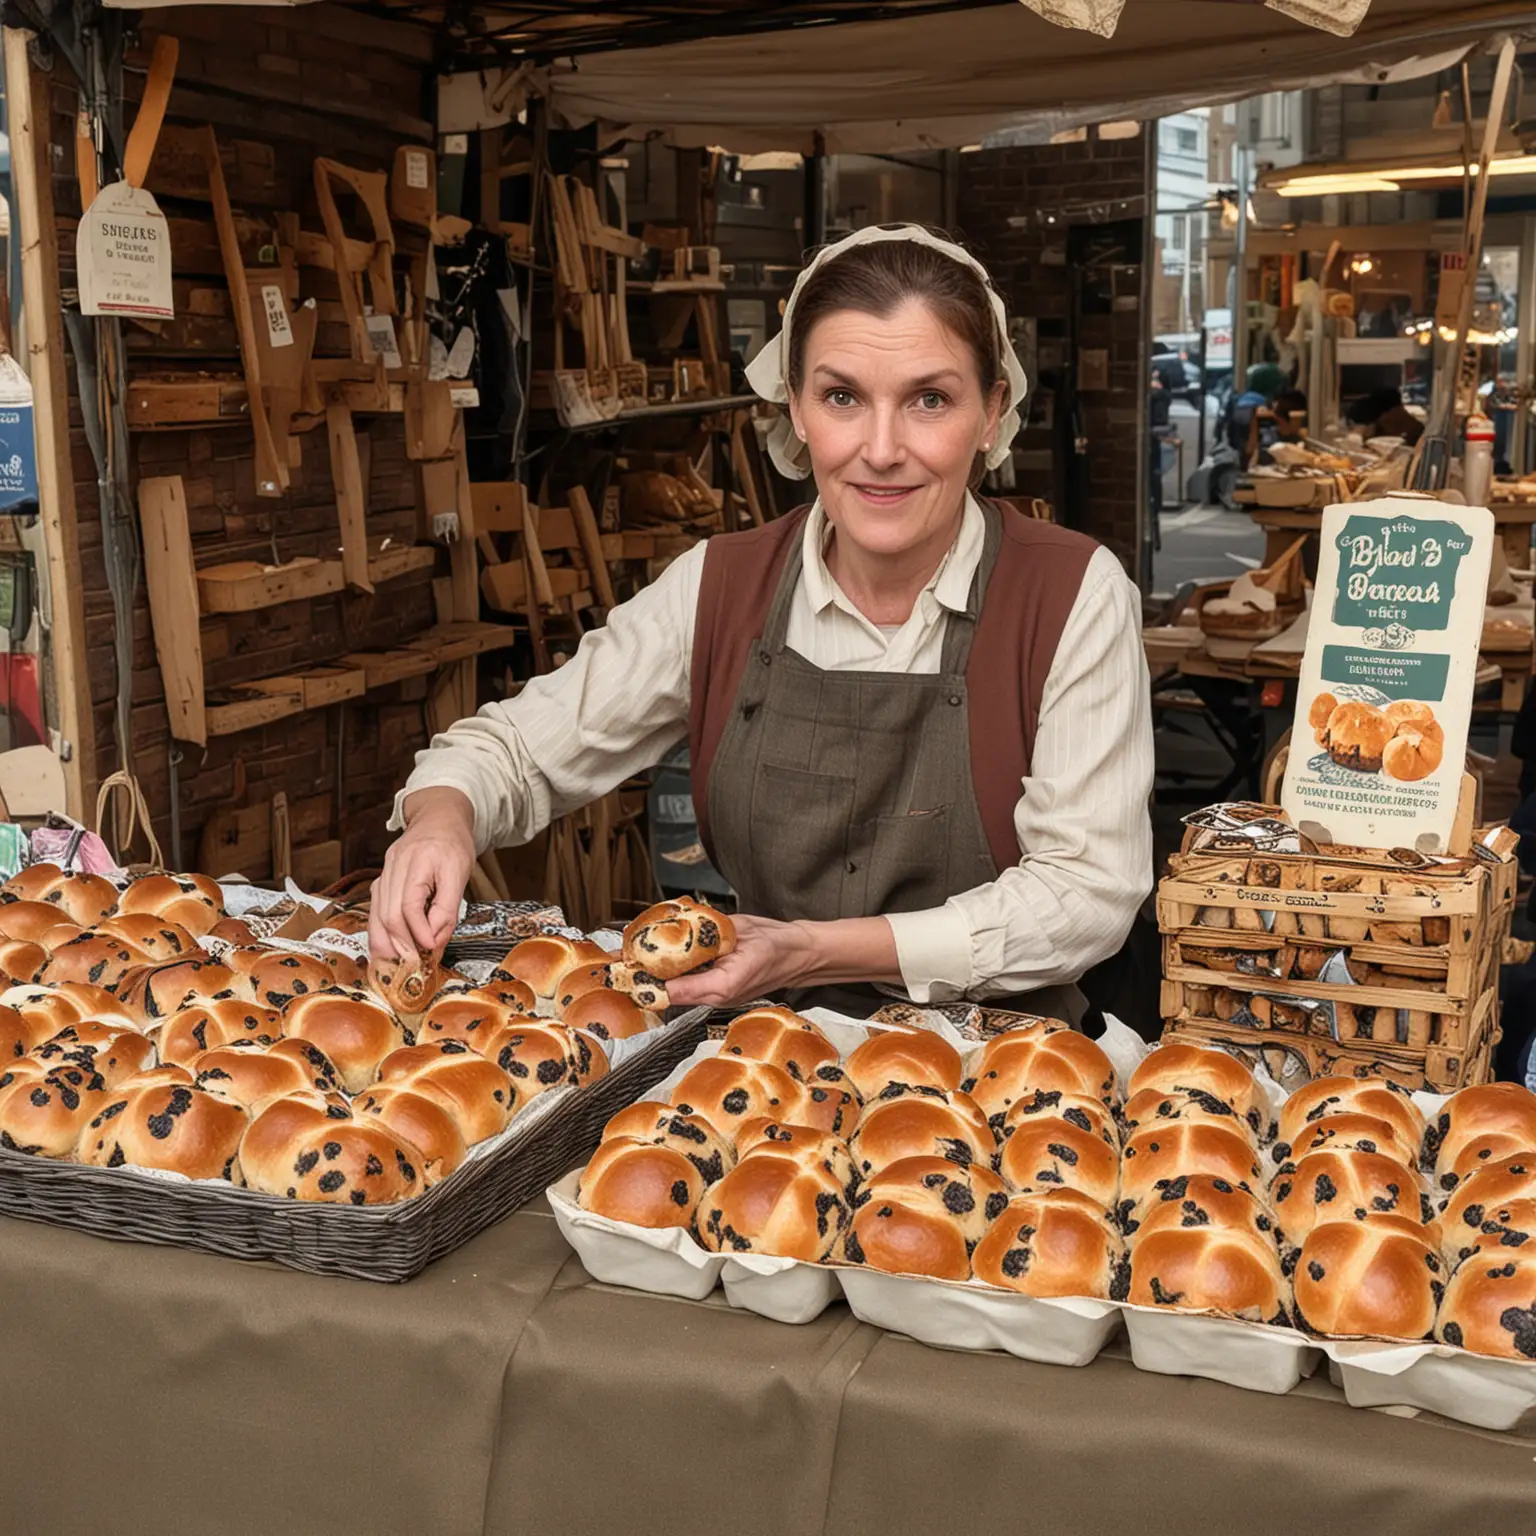 Vintage Market Seller with Hot Cross Buns Stall